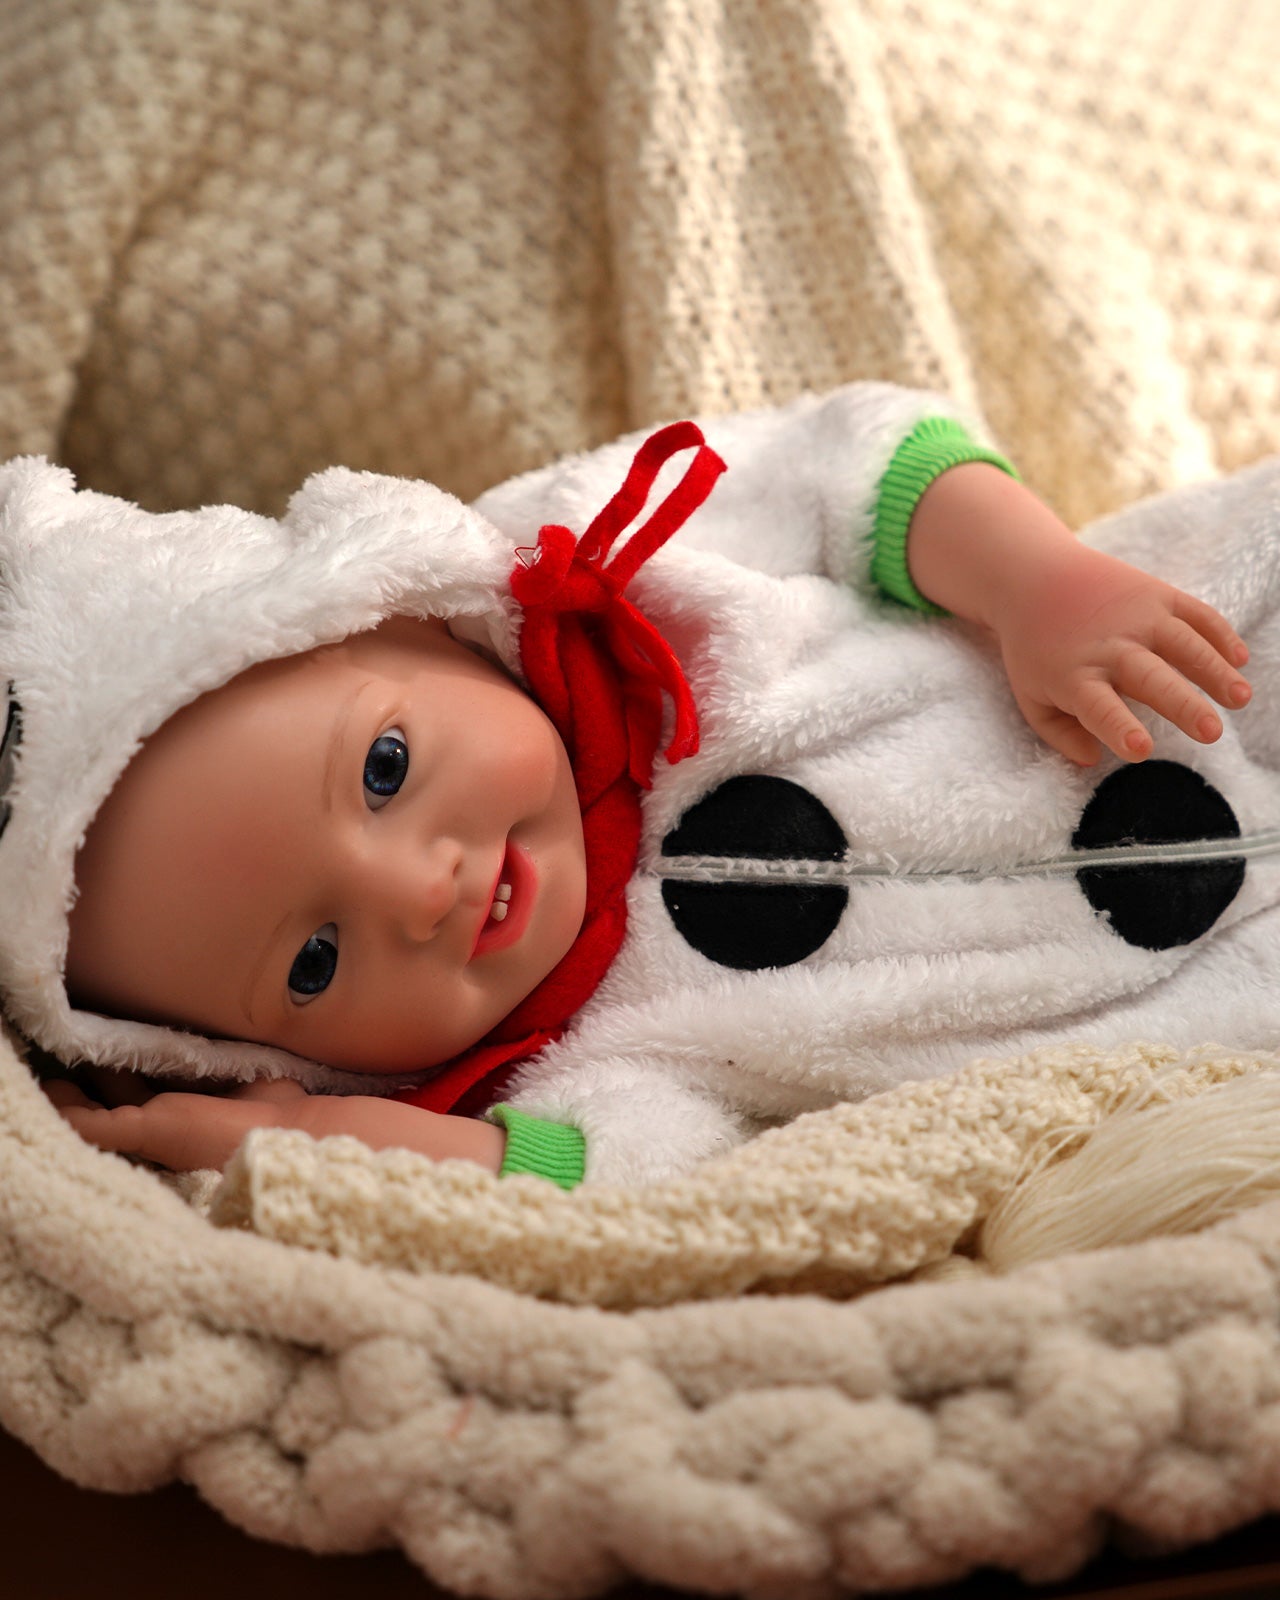 Kara - 18" Full Silicone Reborn Baby Dolls Toothy Grin Bouncy Newborn Girl With Chubby And Pliable Little Hands